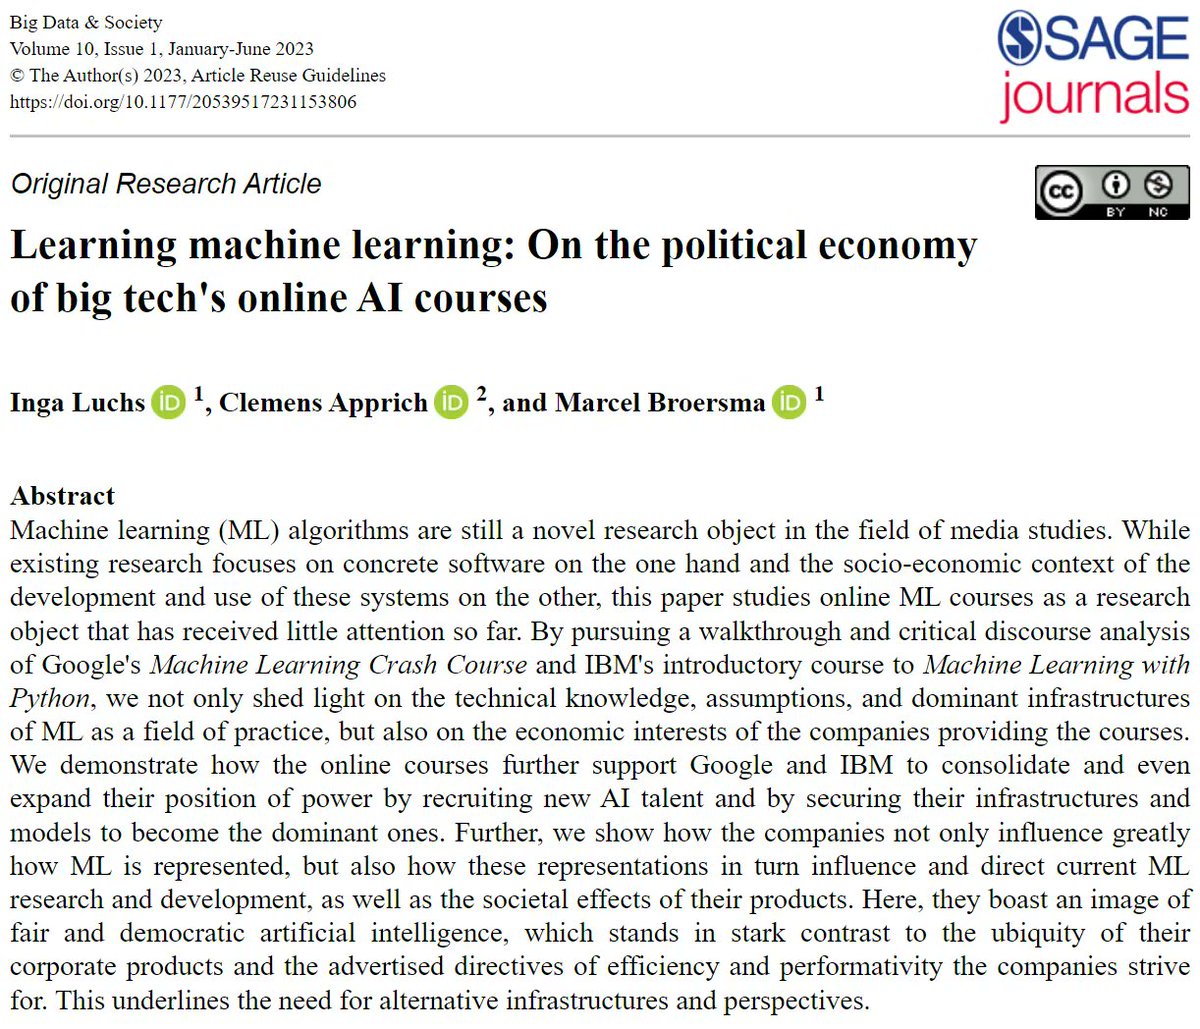 Revisit the paper 'Learning machine learning: On the political economy of big tech's online AI courses' by Inga Luchs (@lynxlynxly), Clemens Apprich and Marcel Broersma (@MJBroersma) at buff.ly/3DPA18j #AI #machinelearning #politicaleconomy